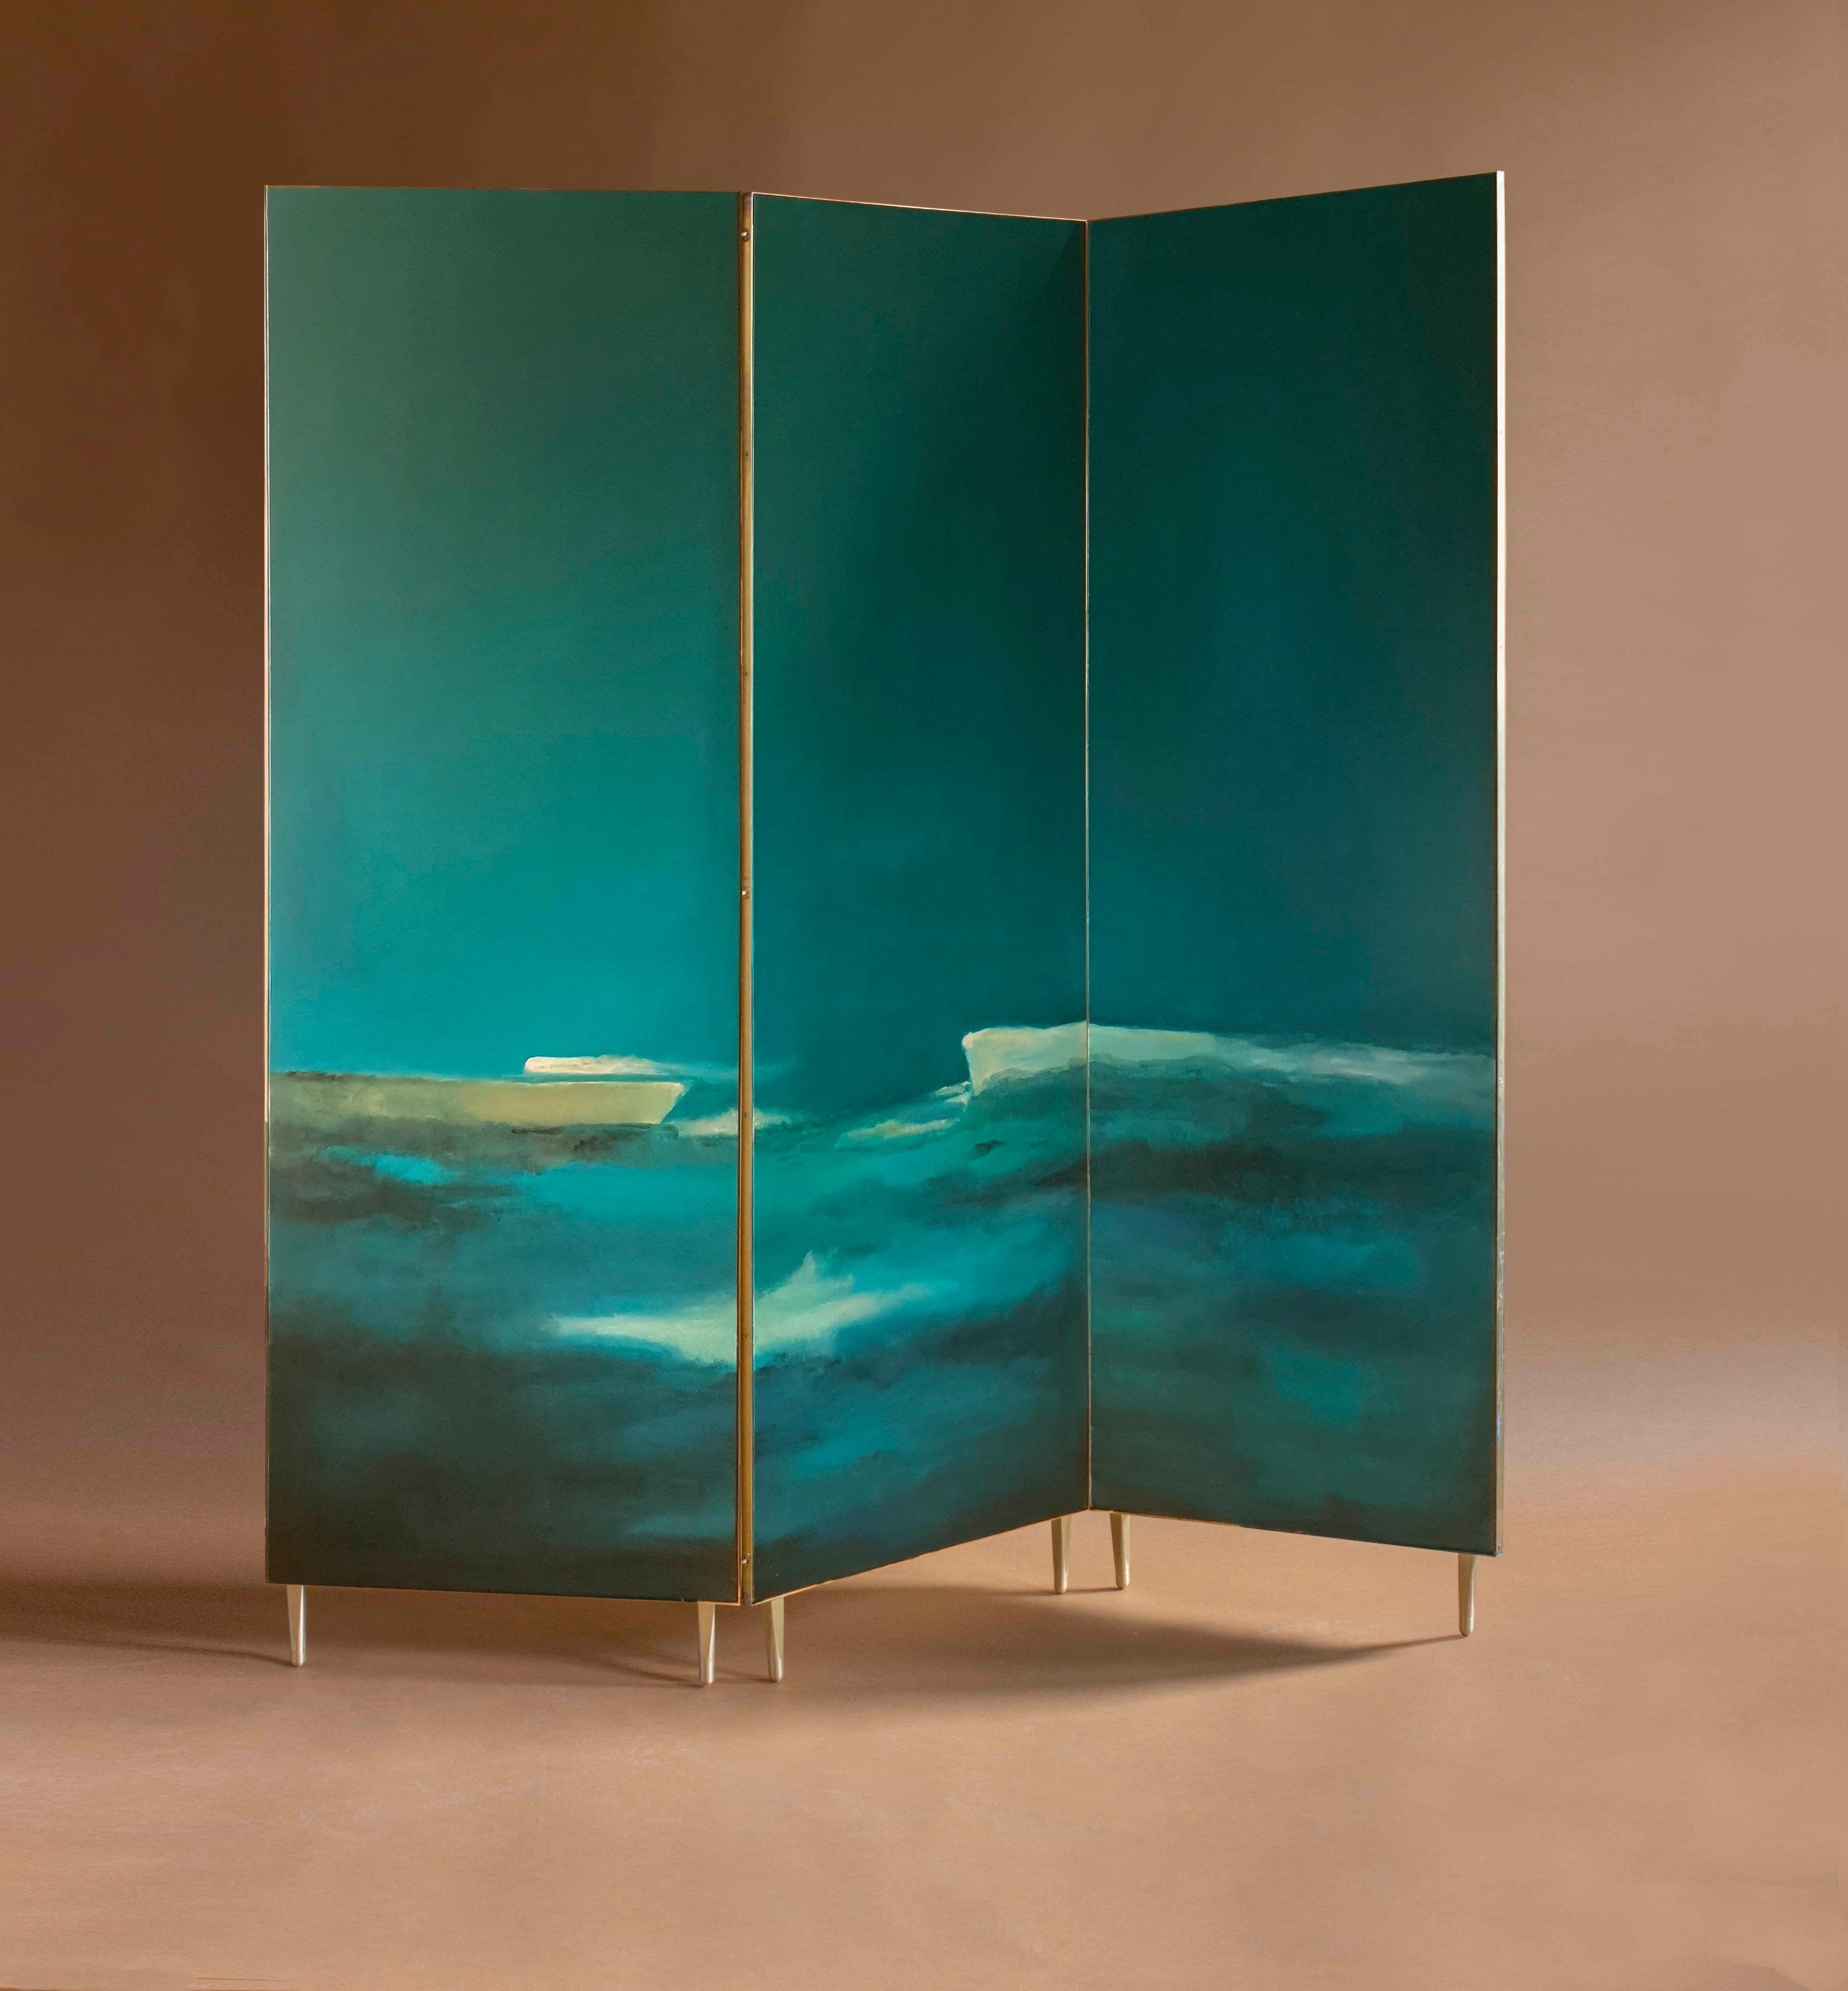 Hand painted screen, Jan Garncarek and Ewelina Makosa
Each screen is unique and signed by Jan Garncarek and Ewelina Makosa
Full brass frame. Hand painted on both sides of the screen.
Dimensions: 180 x 5 x 200 cm
Weight:20 kg

Hand painted